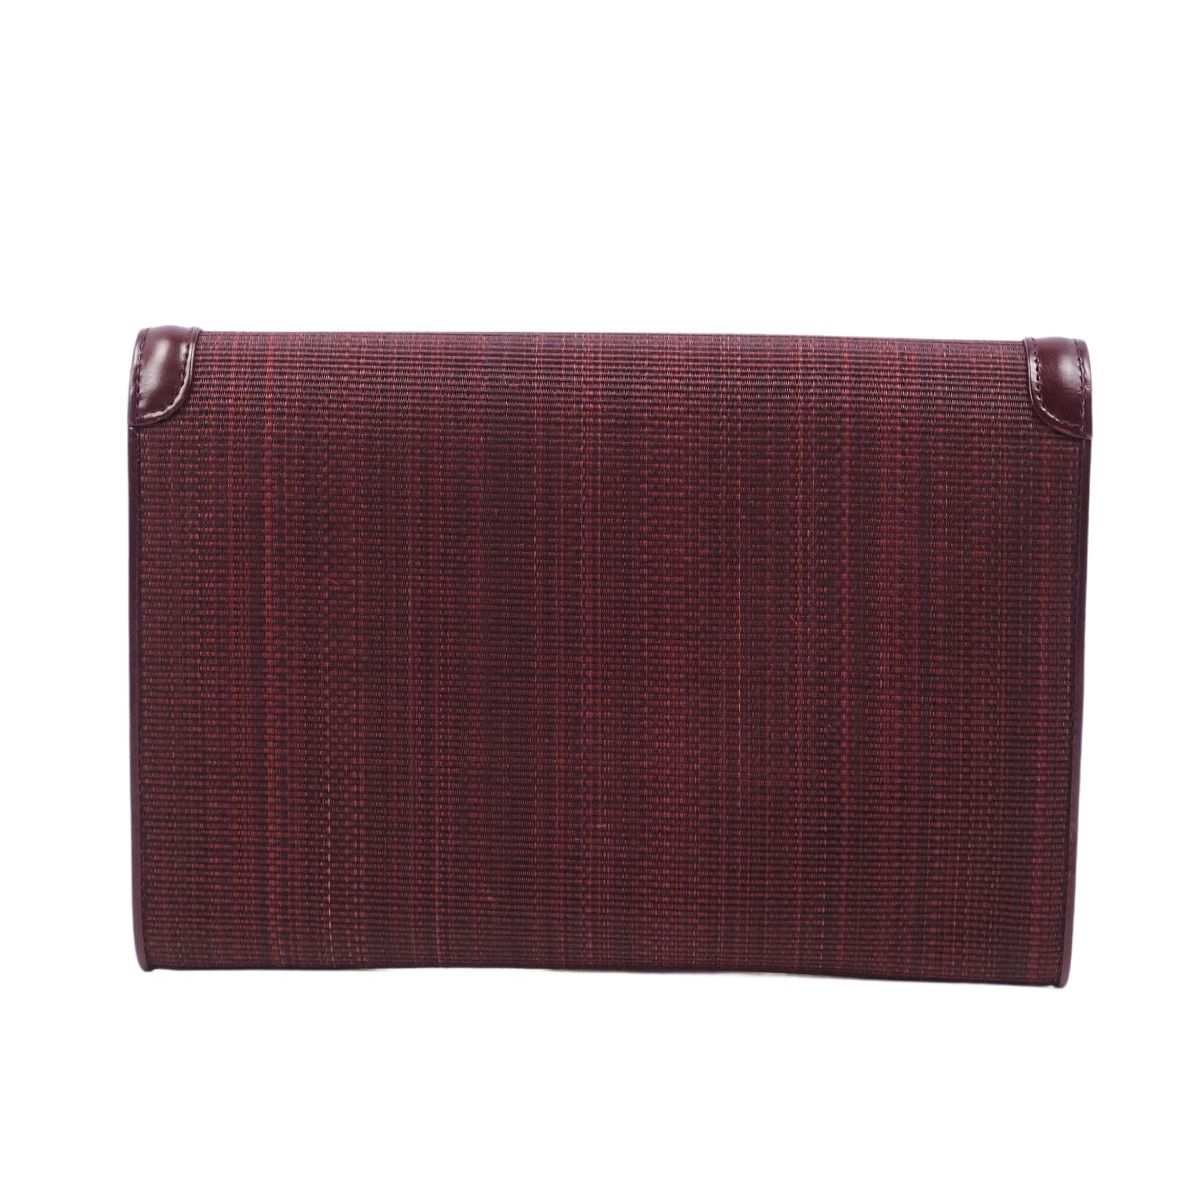  beautiful goods Conte sCOMTESSE bag clutch bag second bag hose hair - horse wool lady's Germany made bordeaux ch09os-rm04e21102